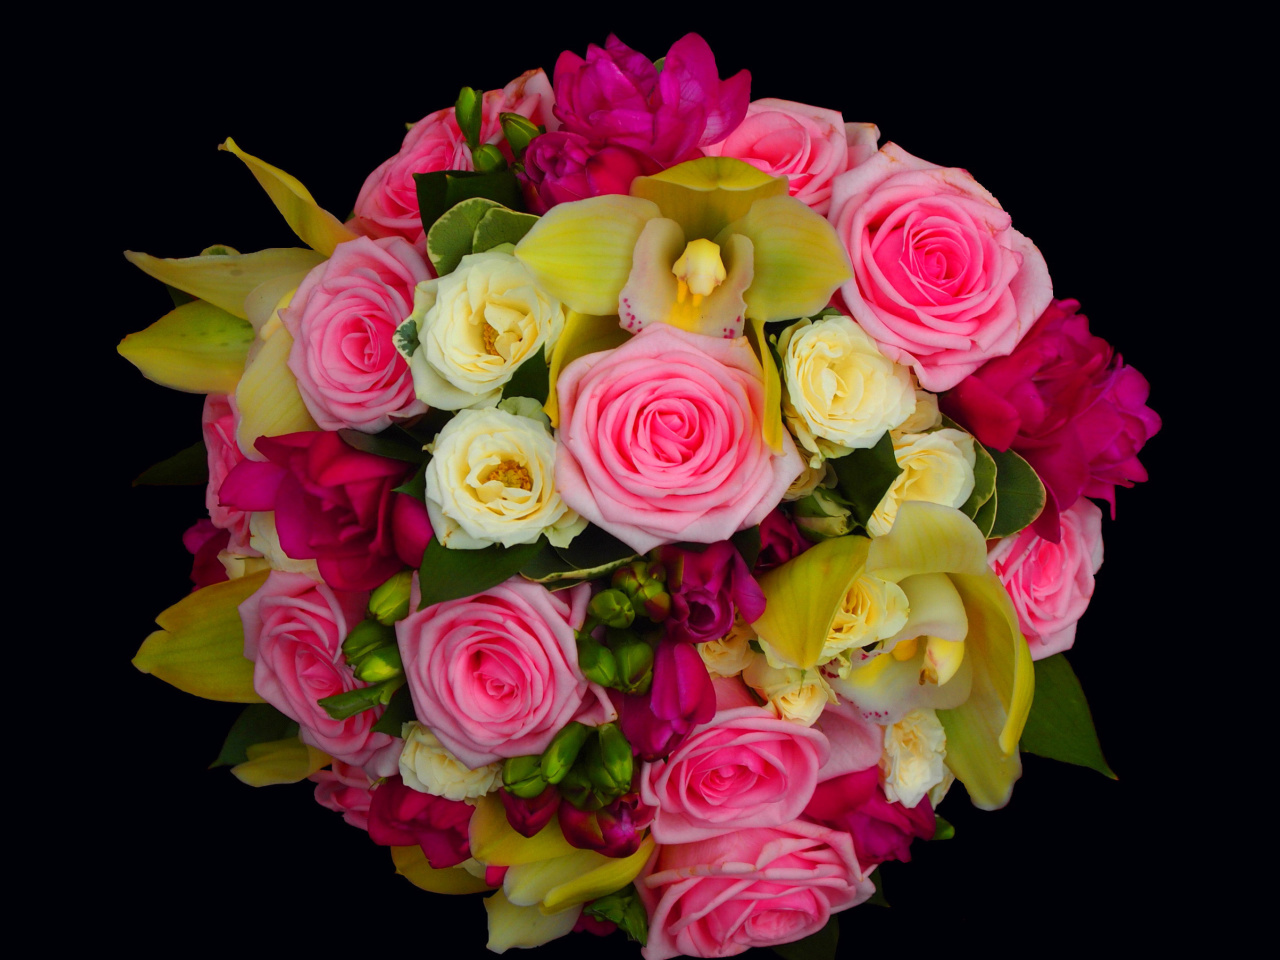 Bouquet of roses and yellow orchid, floristry wallpaper 1280x960